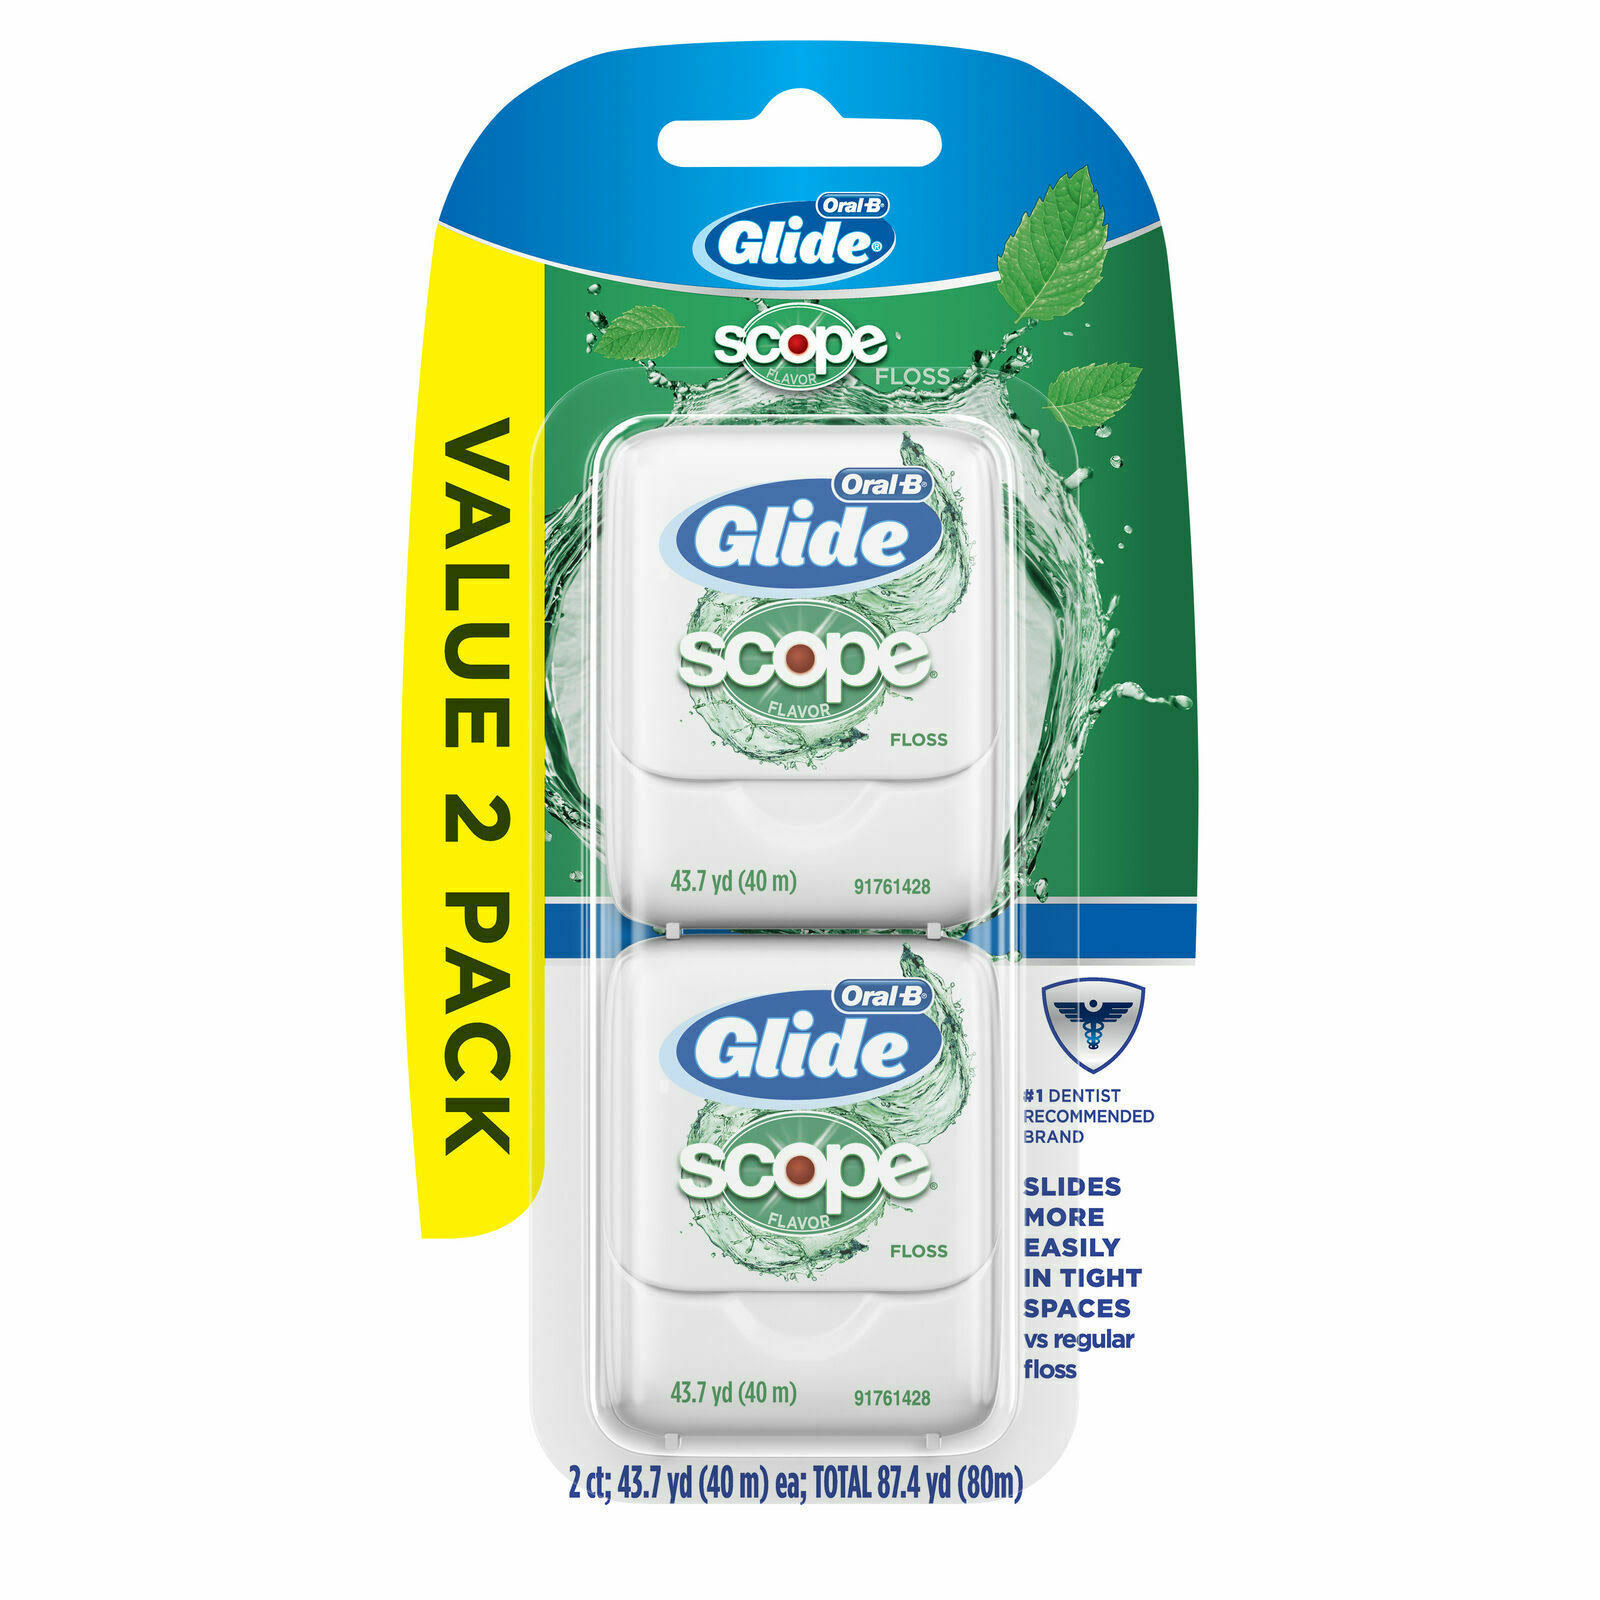 Oral-B, Glide, Scope Floss, 2 Count, 43.7 YD (40 M) EACH